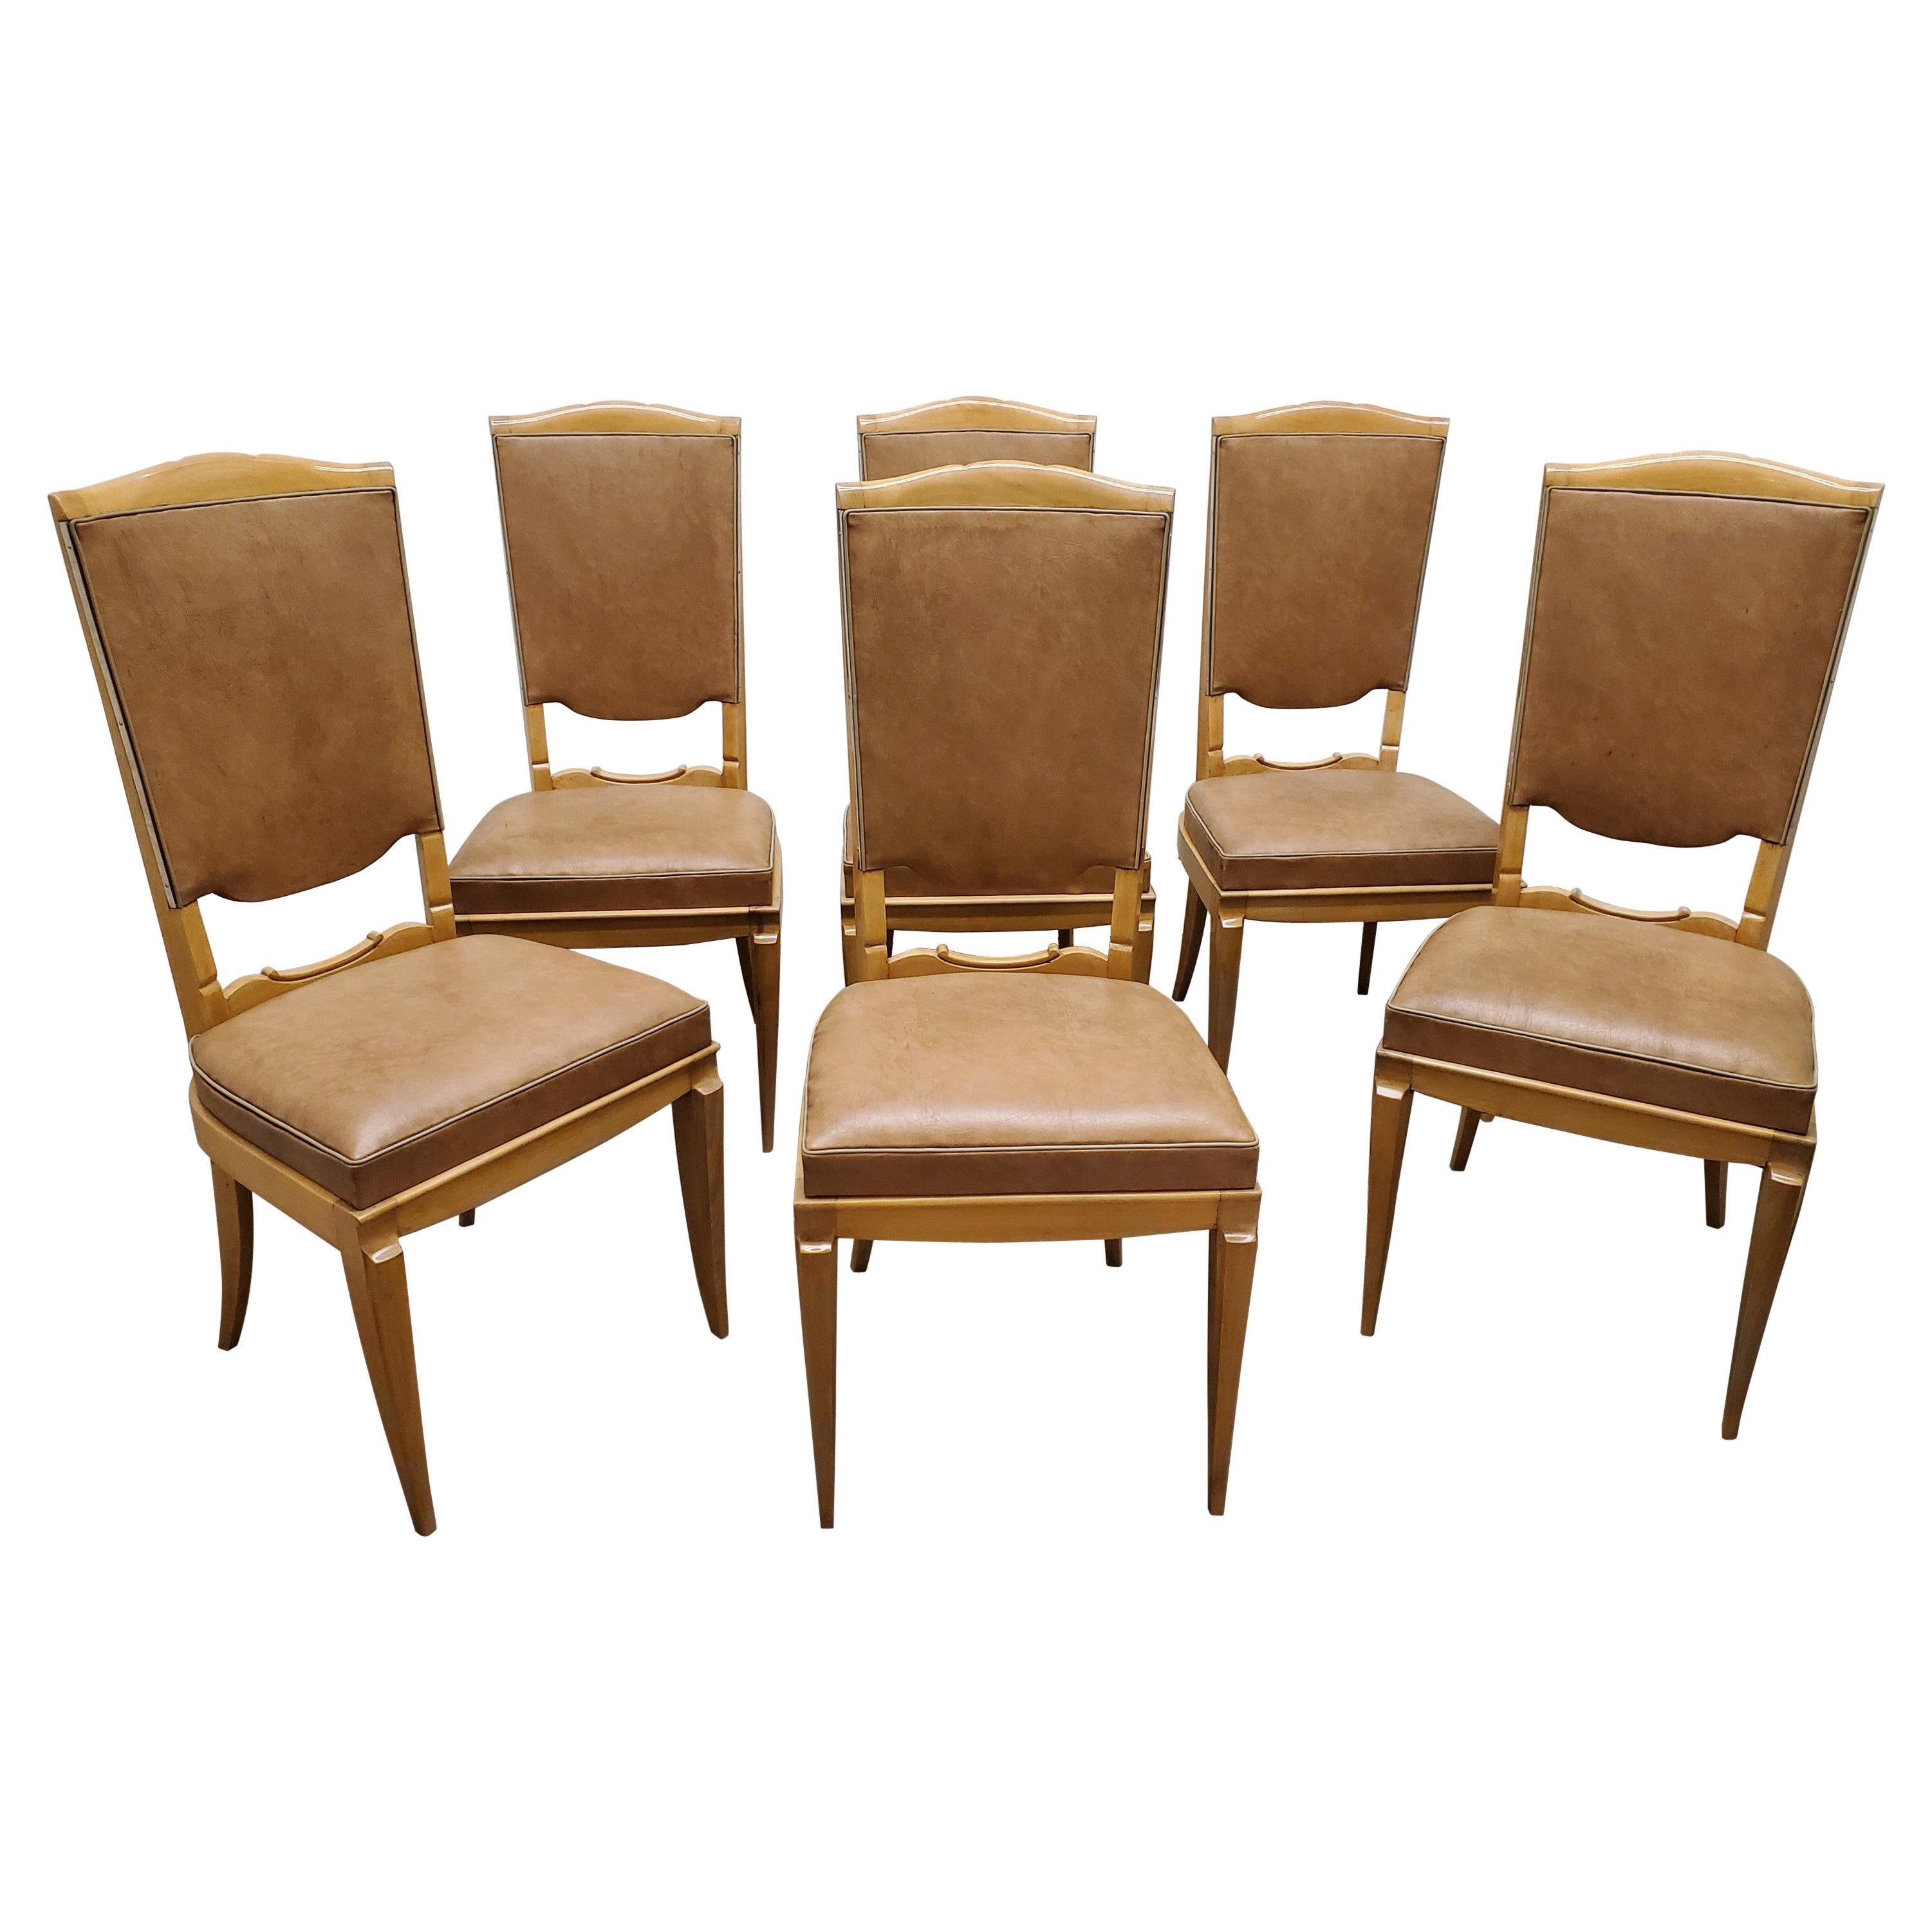 Set of Six 1940's Dining Chairs in Beech w/ Nickel Detail, Attrib to Rene Prou